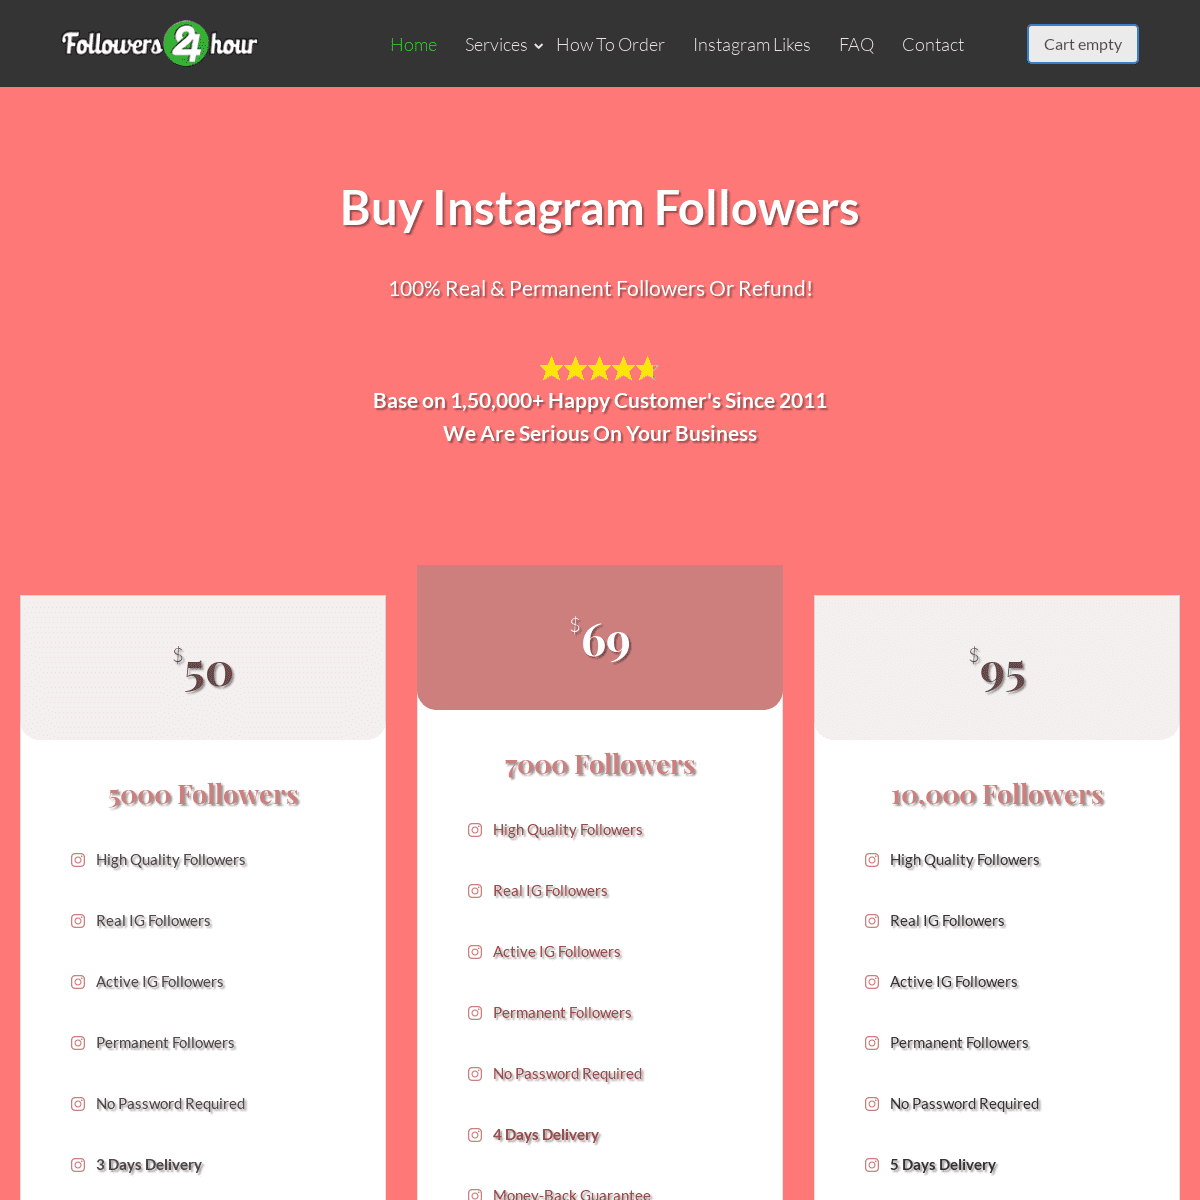 Buy Instagram Followers With 100% Real & Permanent Followers